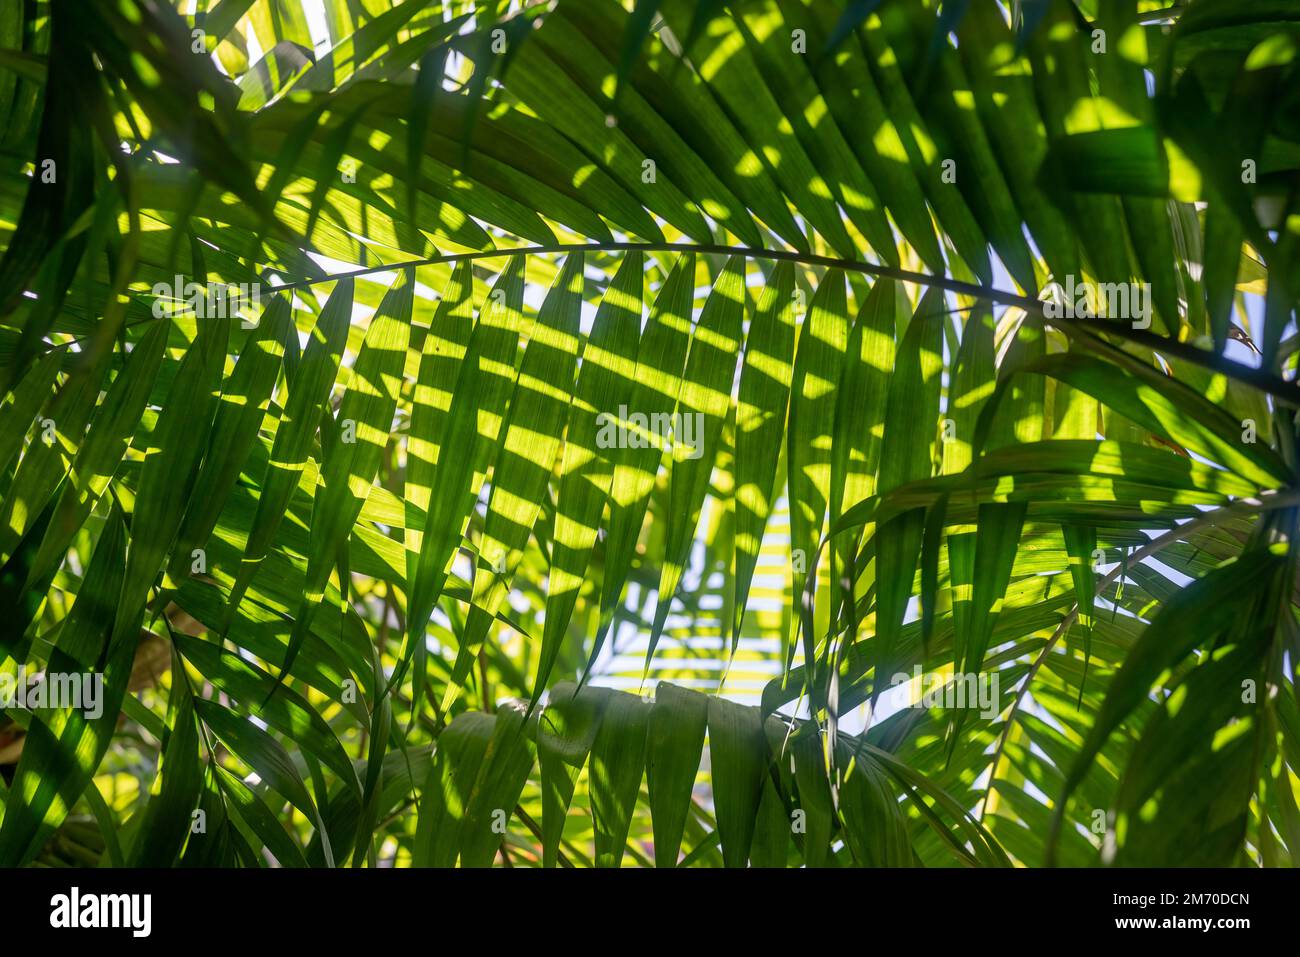 Mostly blurred green tropical leaves background. Palm tree shaped pacaya foliage Stock Photo